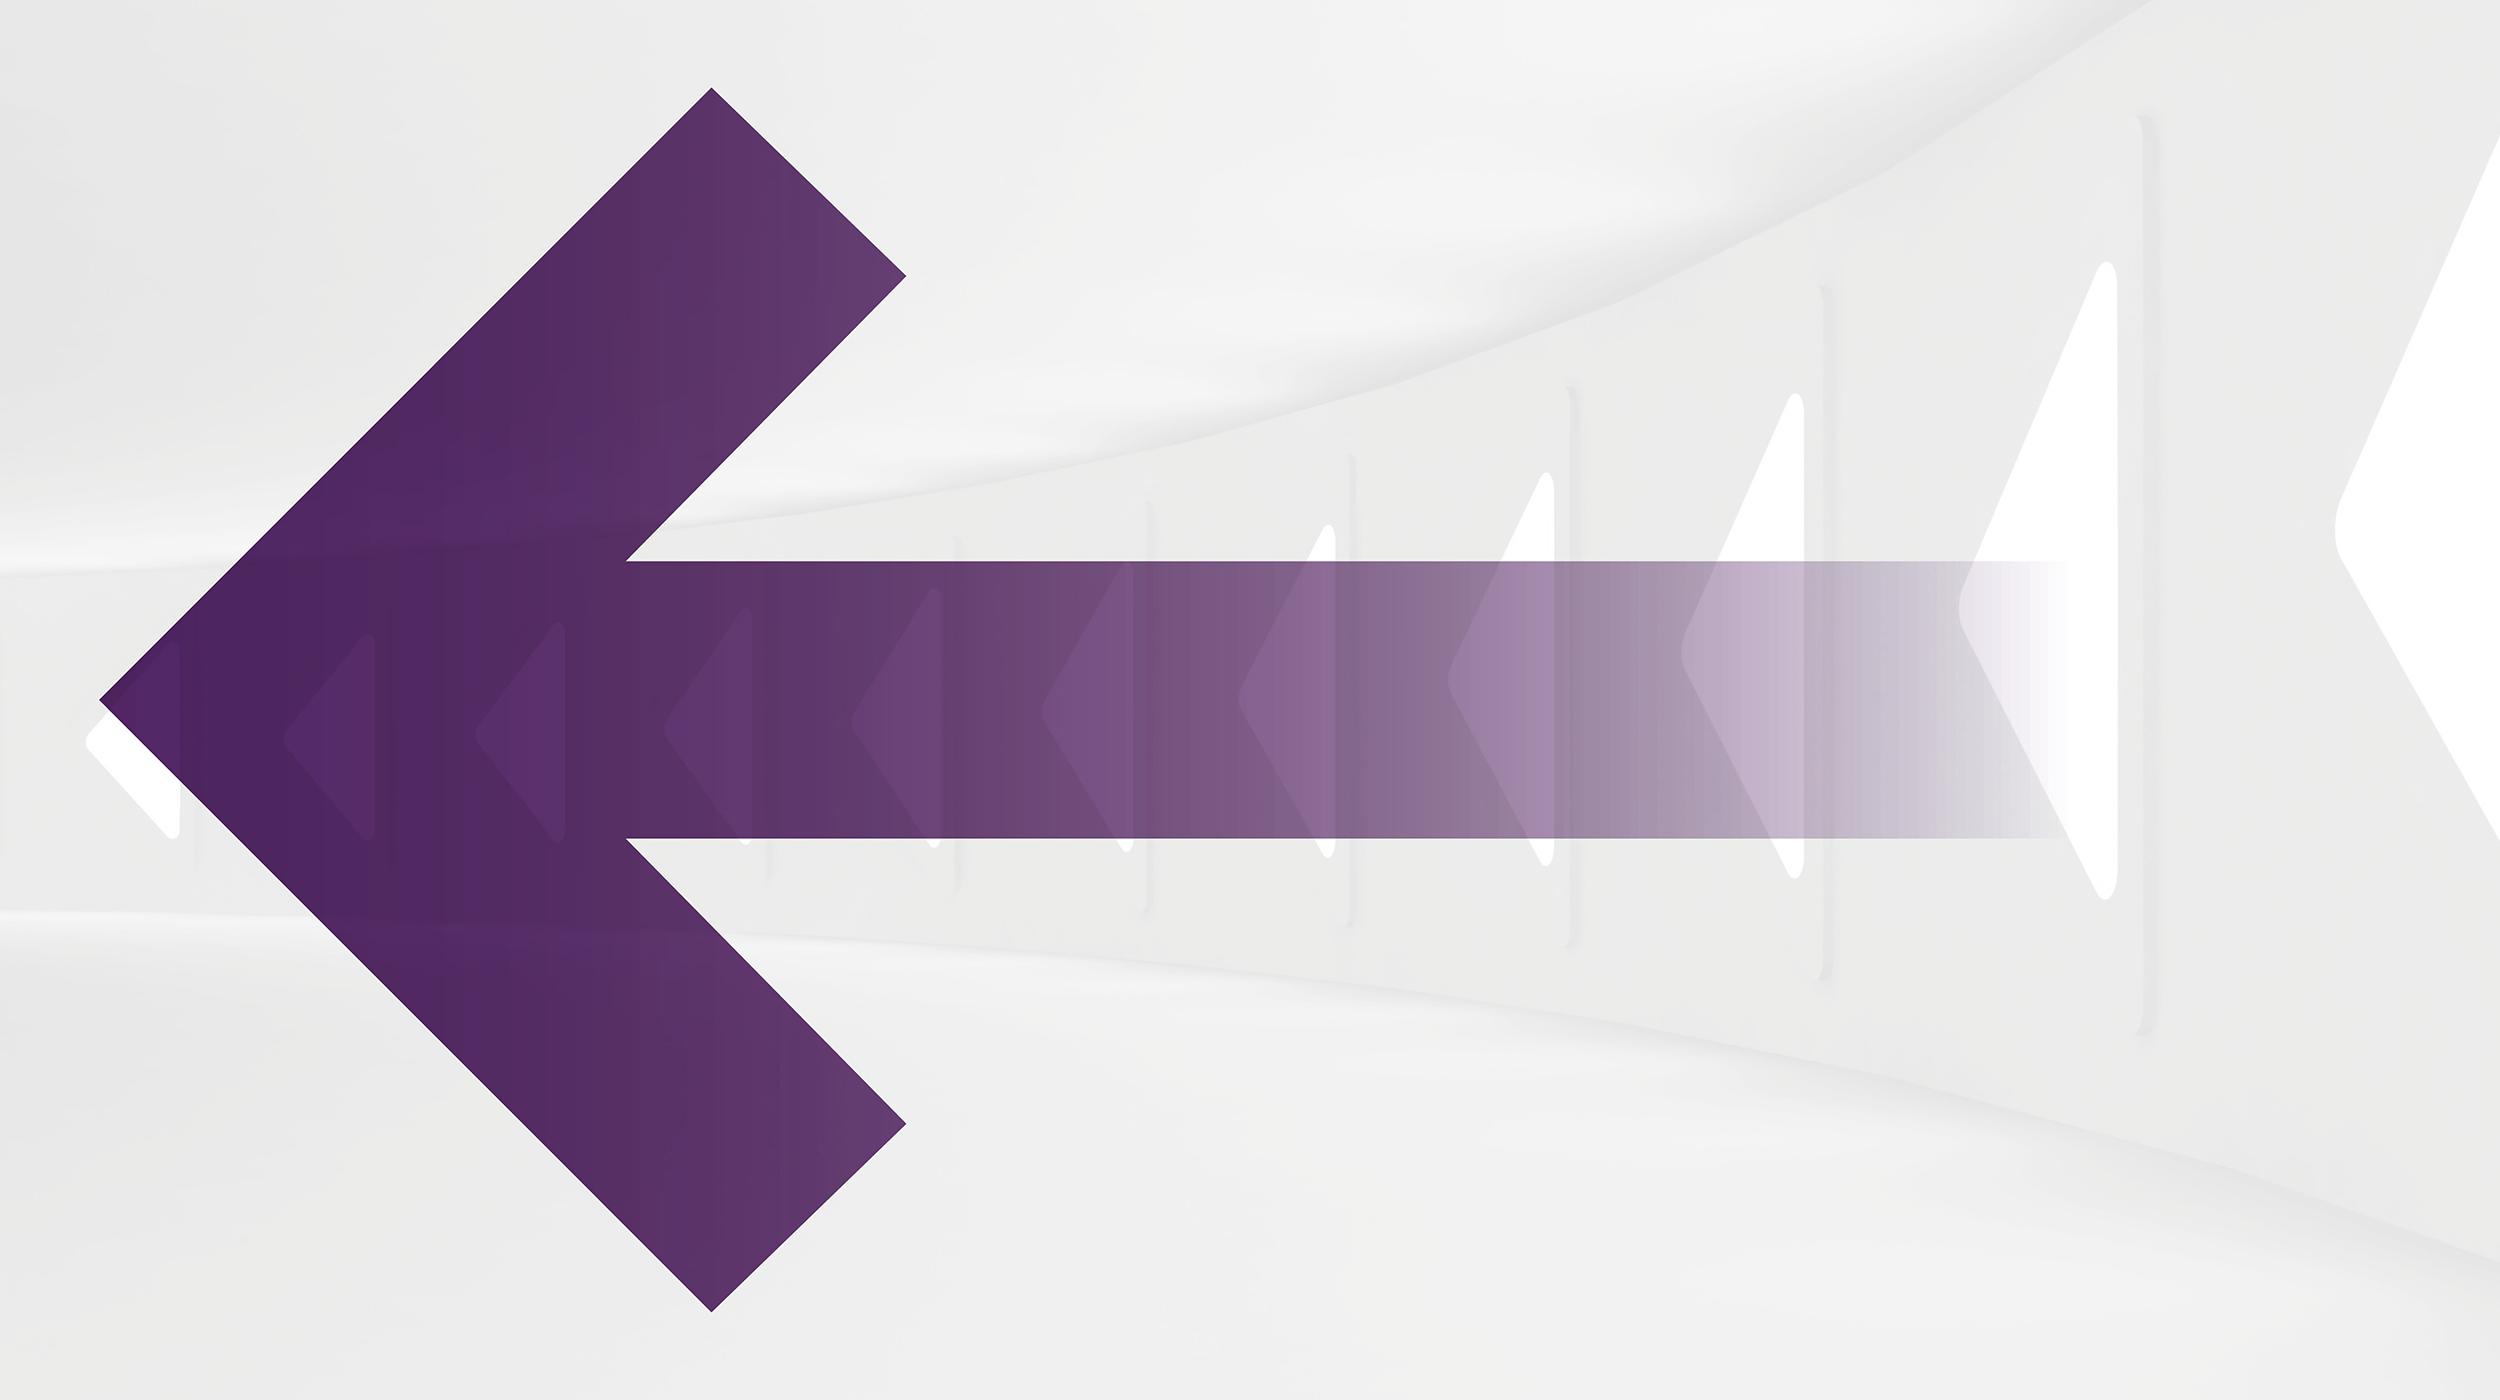 Large purple arrow pointing to the right, on a white and grey background